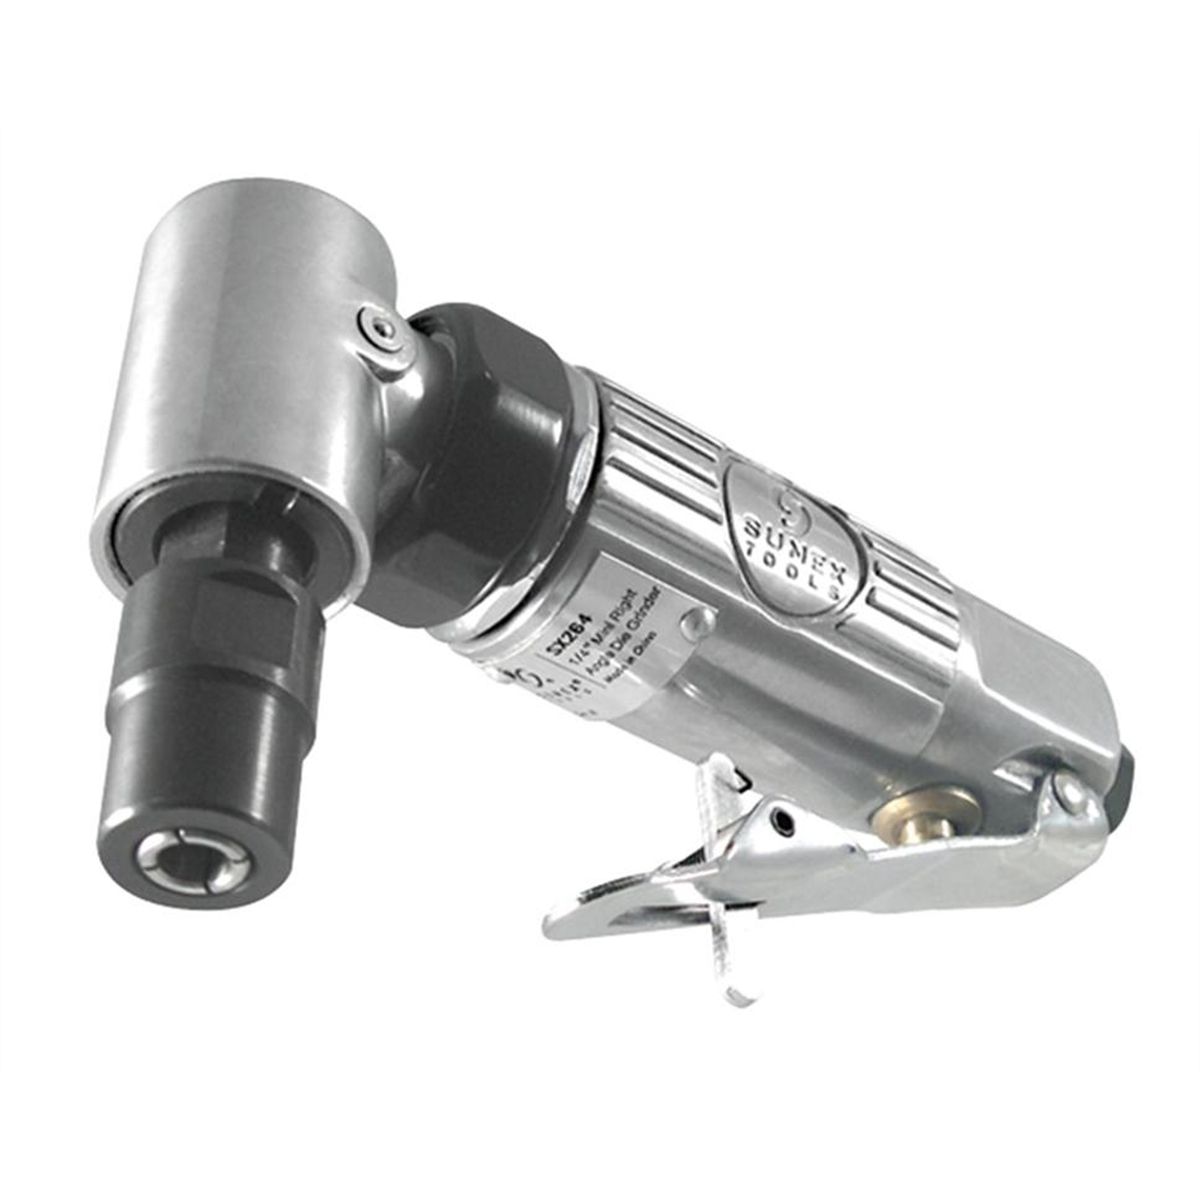 Mini 1/4" Drive Right Angle Die Grinder